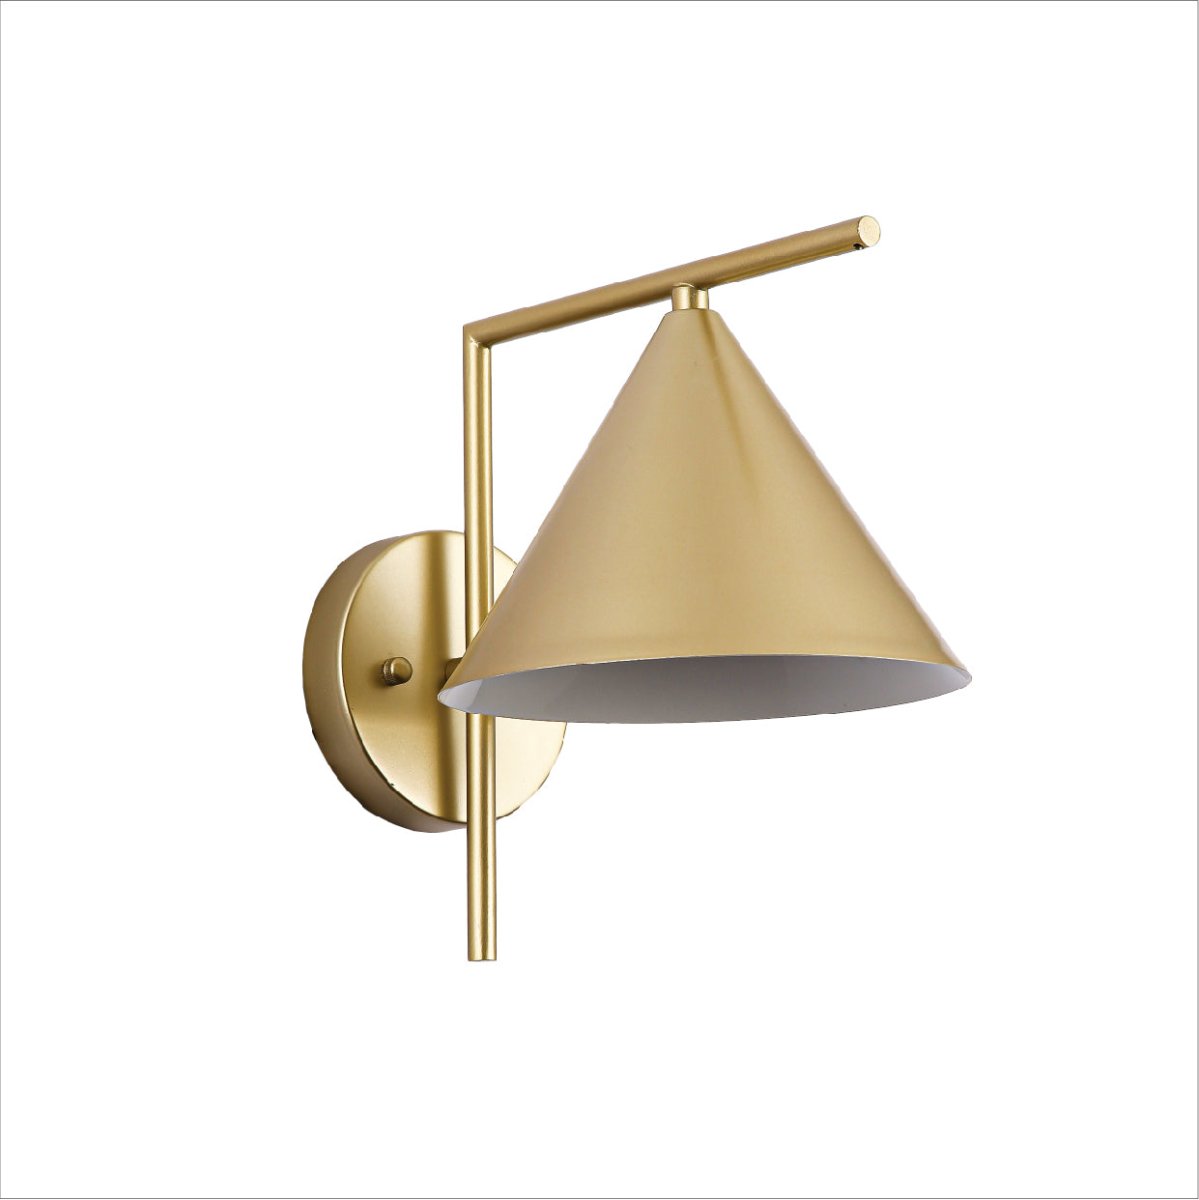 Main image of Gold Metal Funnel Wall Light with E27 Fitting | TEKLED 151-19658